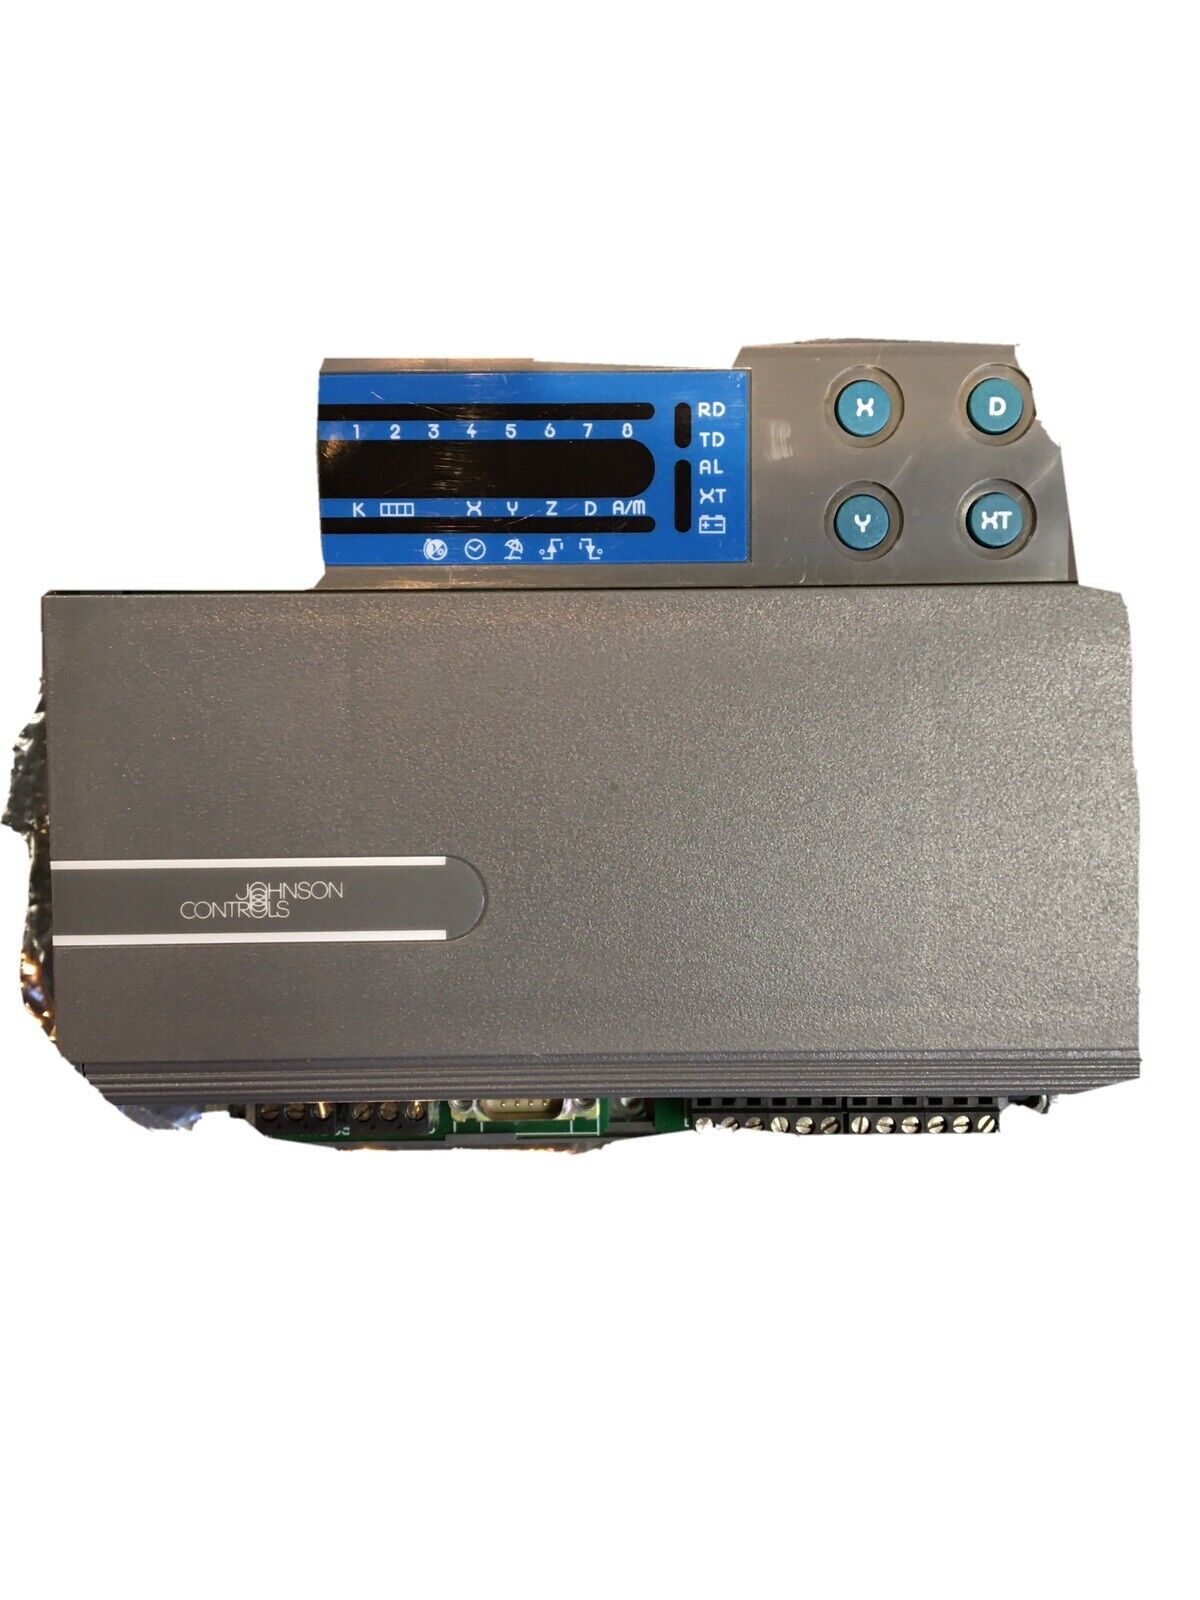 Johnson Controls Metasys DX-9100-8454 Digital Controller with base